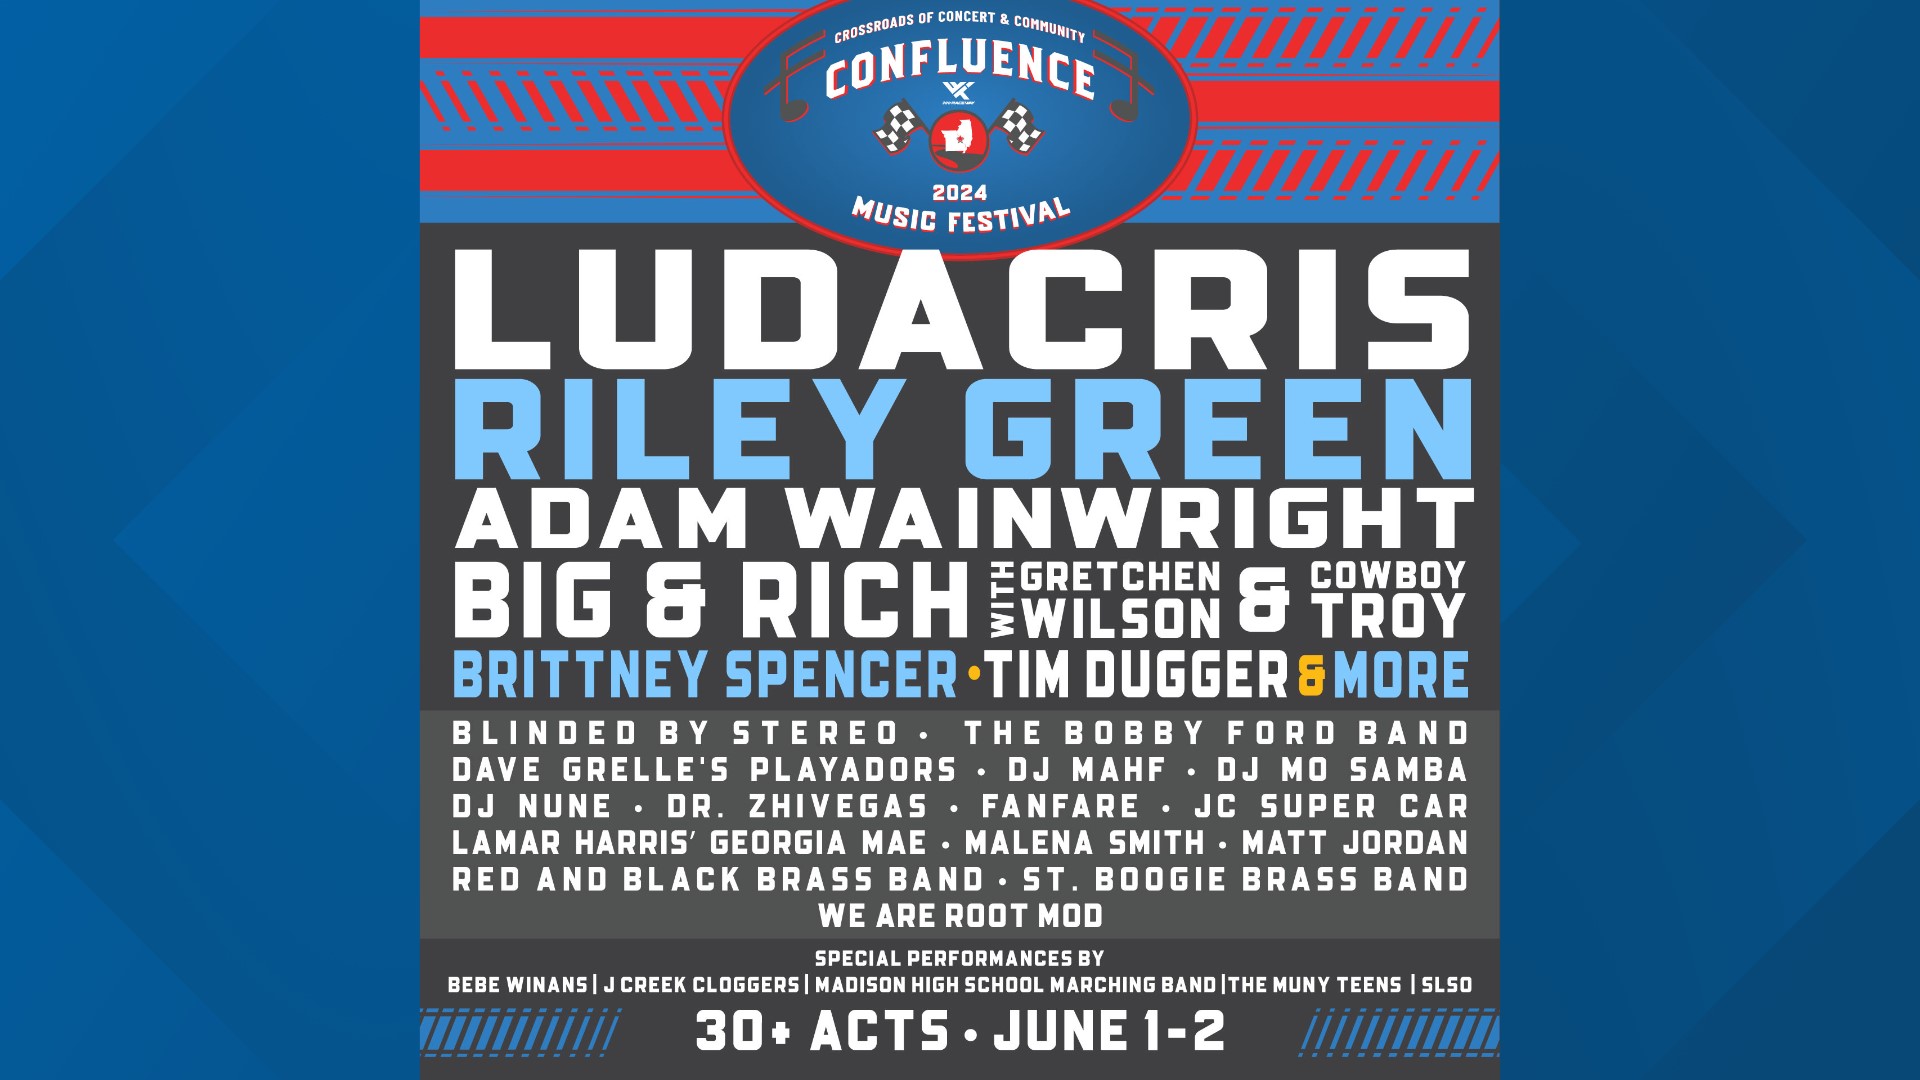 The Confluence Music Festival will feature a variety of performers. Headliners include rapper Ludacris, rising star Riley Green and former Cardinal Adam Wainwright.